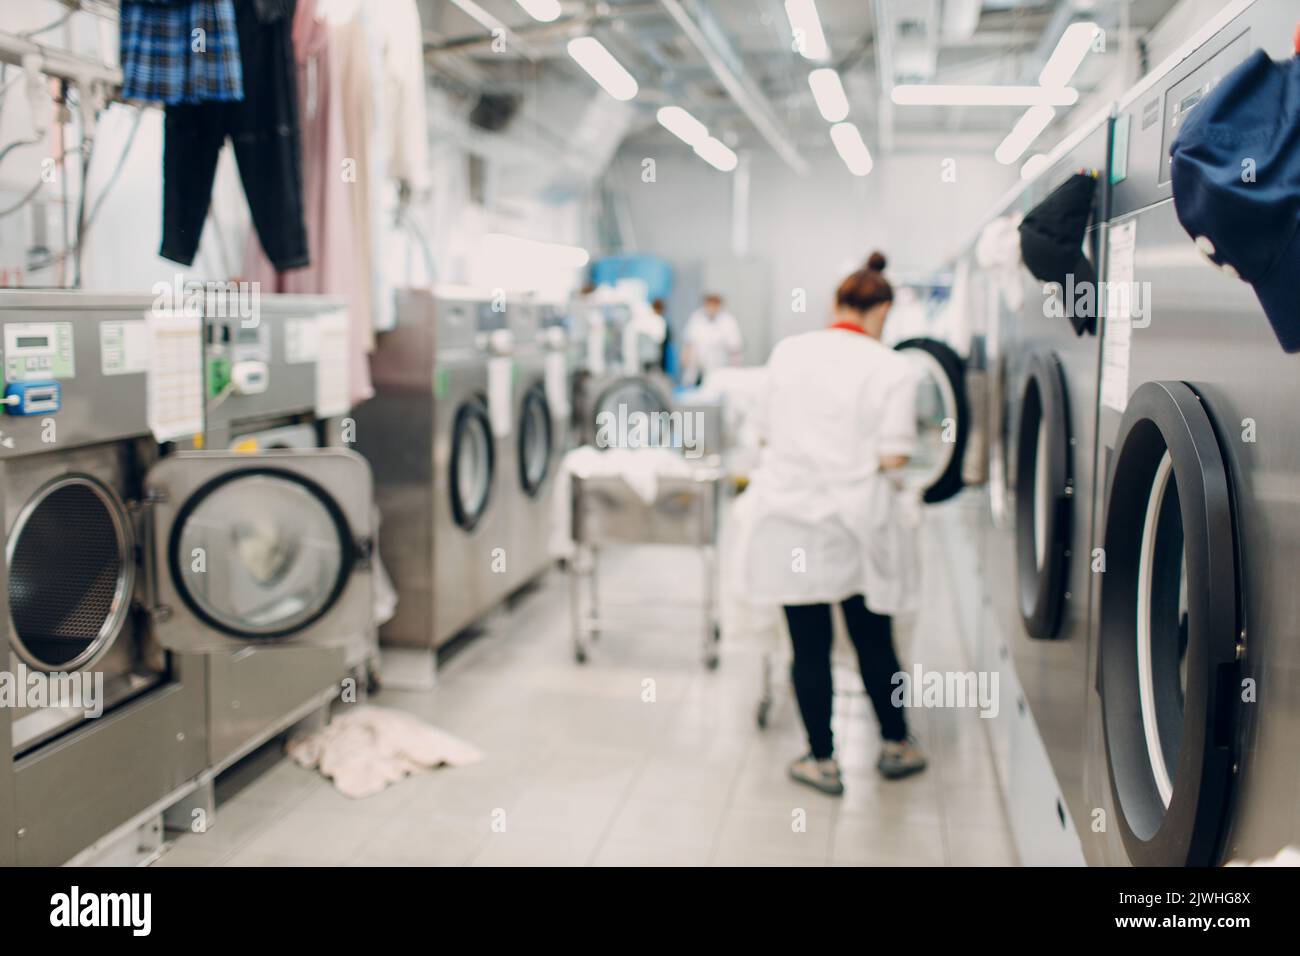 Dry cleaning inserting clothes. Clean cloth chemical process. Laundry industrial dry-cleaning. Stock Photo